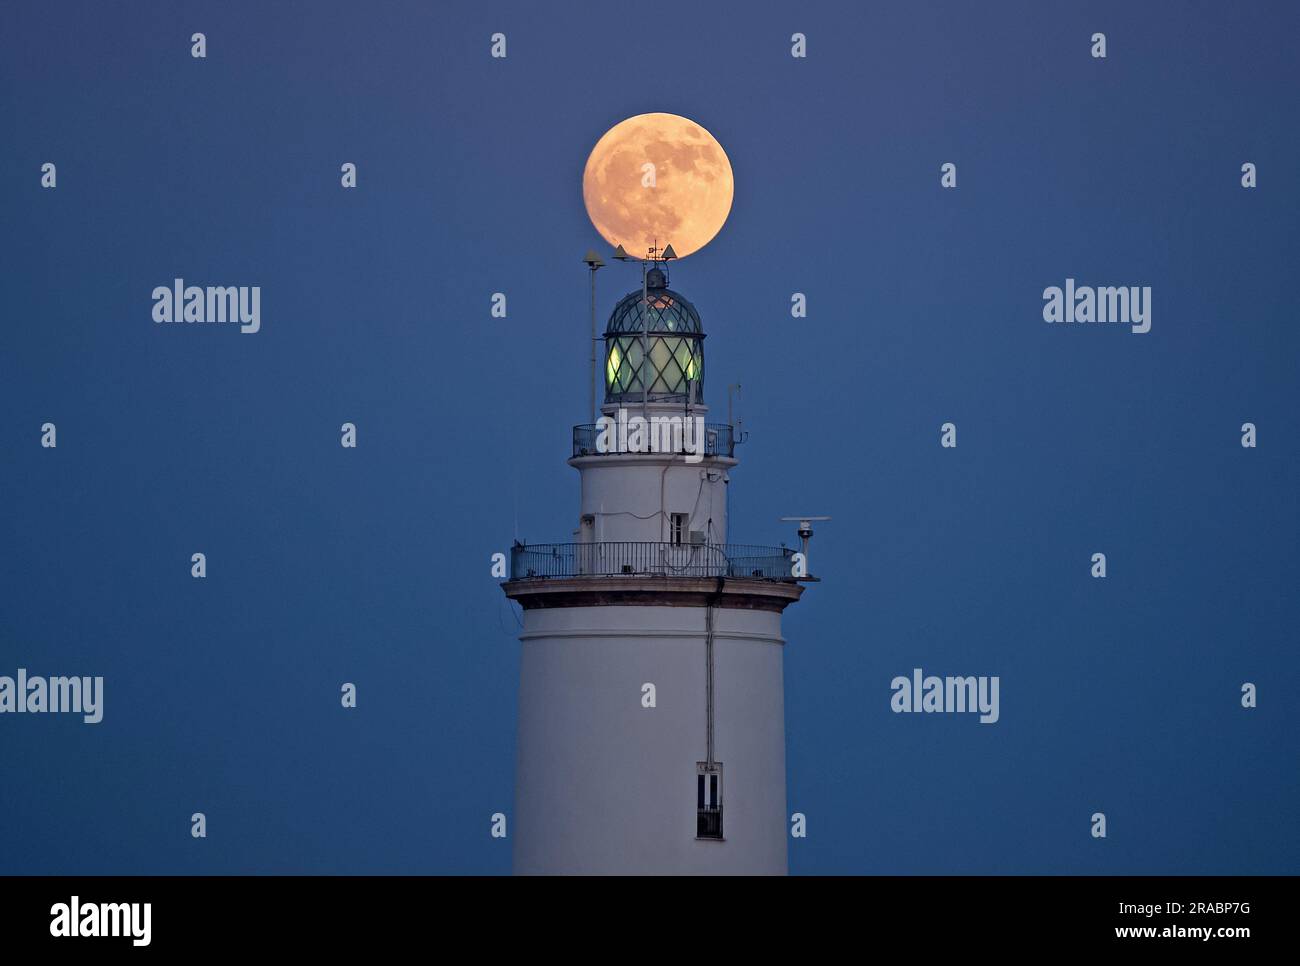 The buck moon rising in the sky over a lighthouse is seen at port of Malaga. At the beginning of July, the full deer moon takes place as one of the most striking astronomical events of the month. When the full moon takes place it appears larger and brighter than normal. Stock Photo